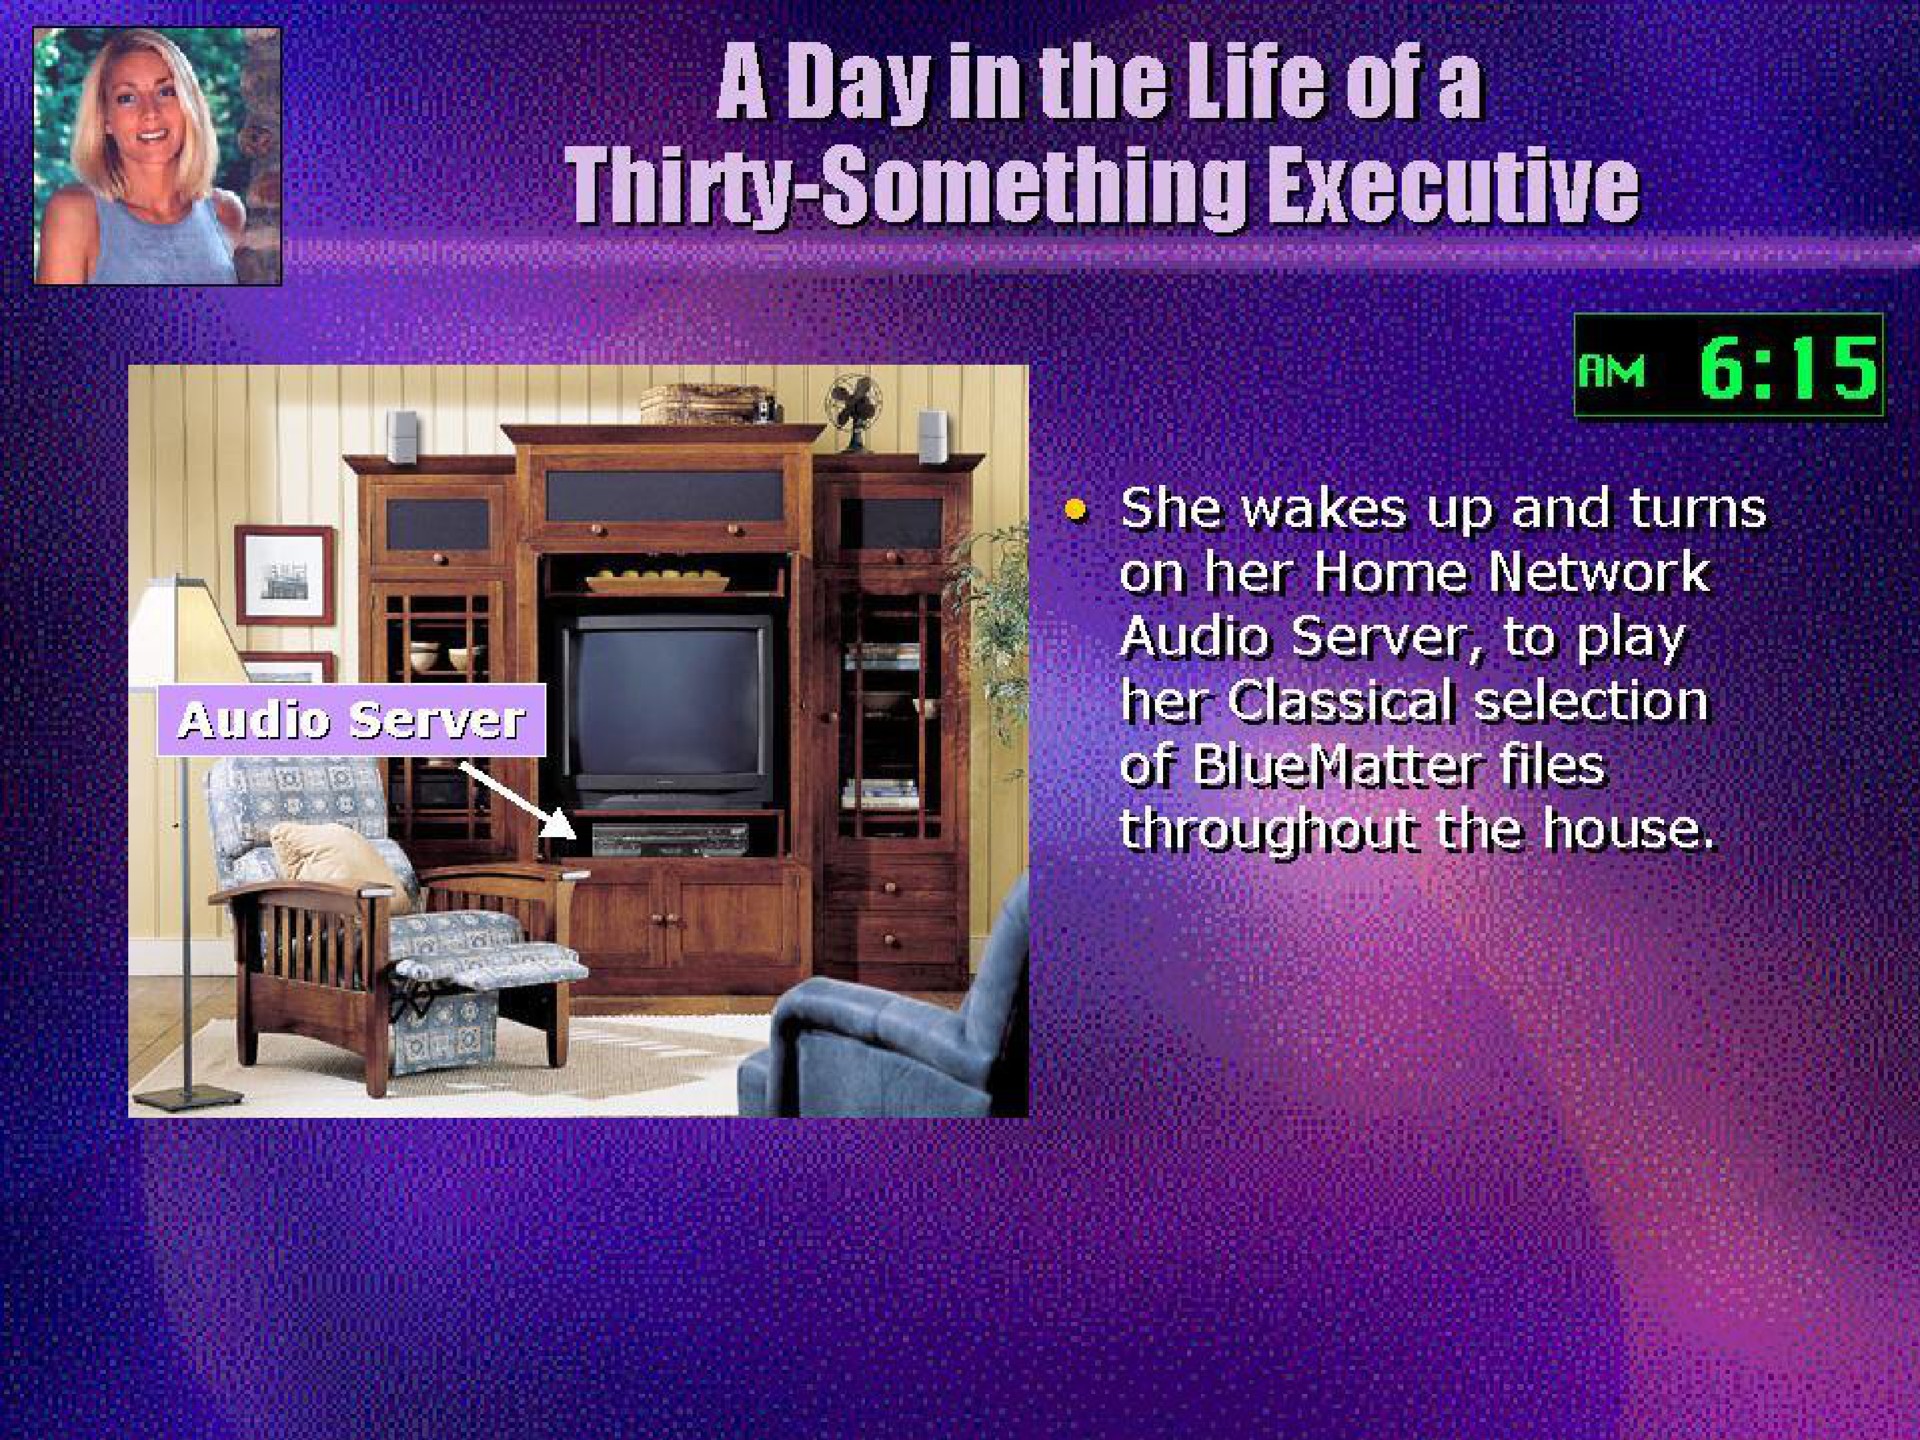 a day in the life she wakes up and turns on her home network audio server to | Universal Music Group